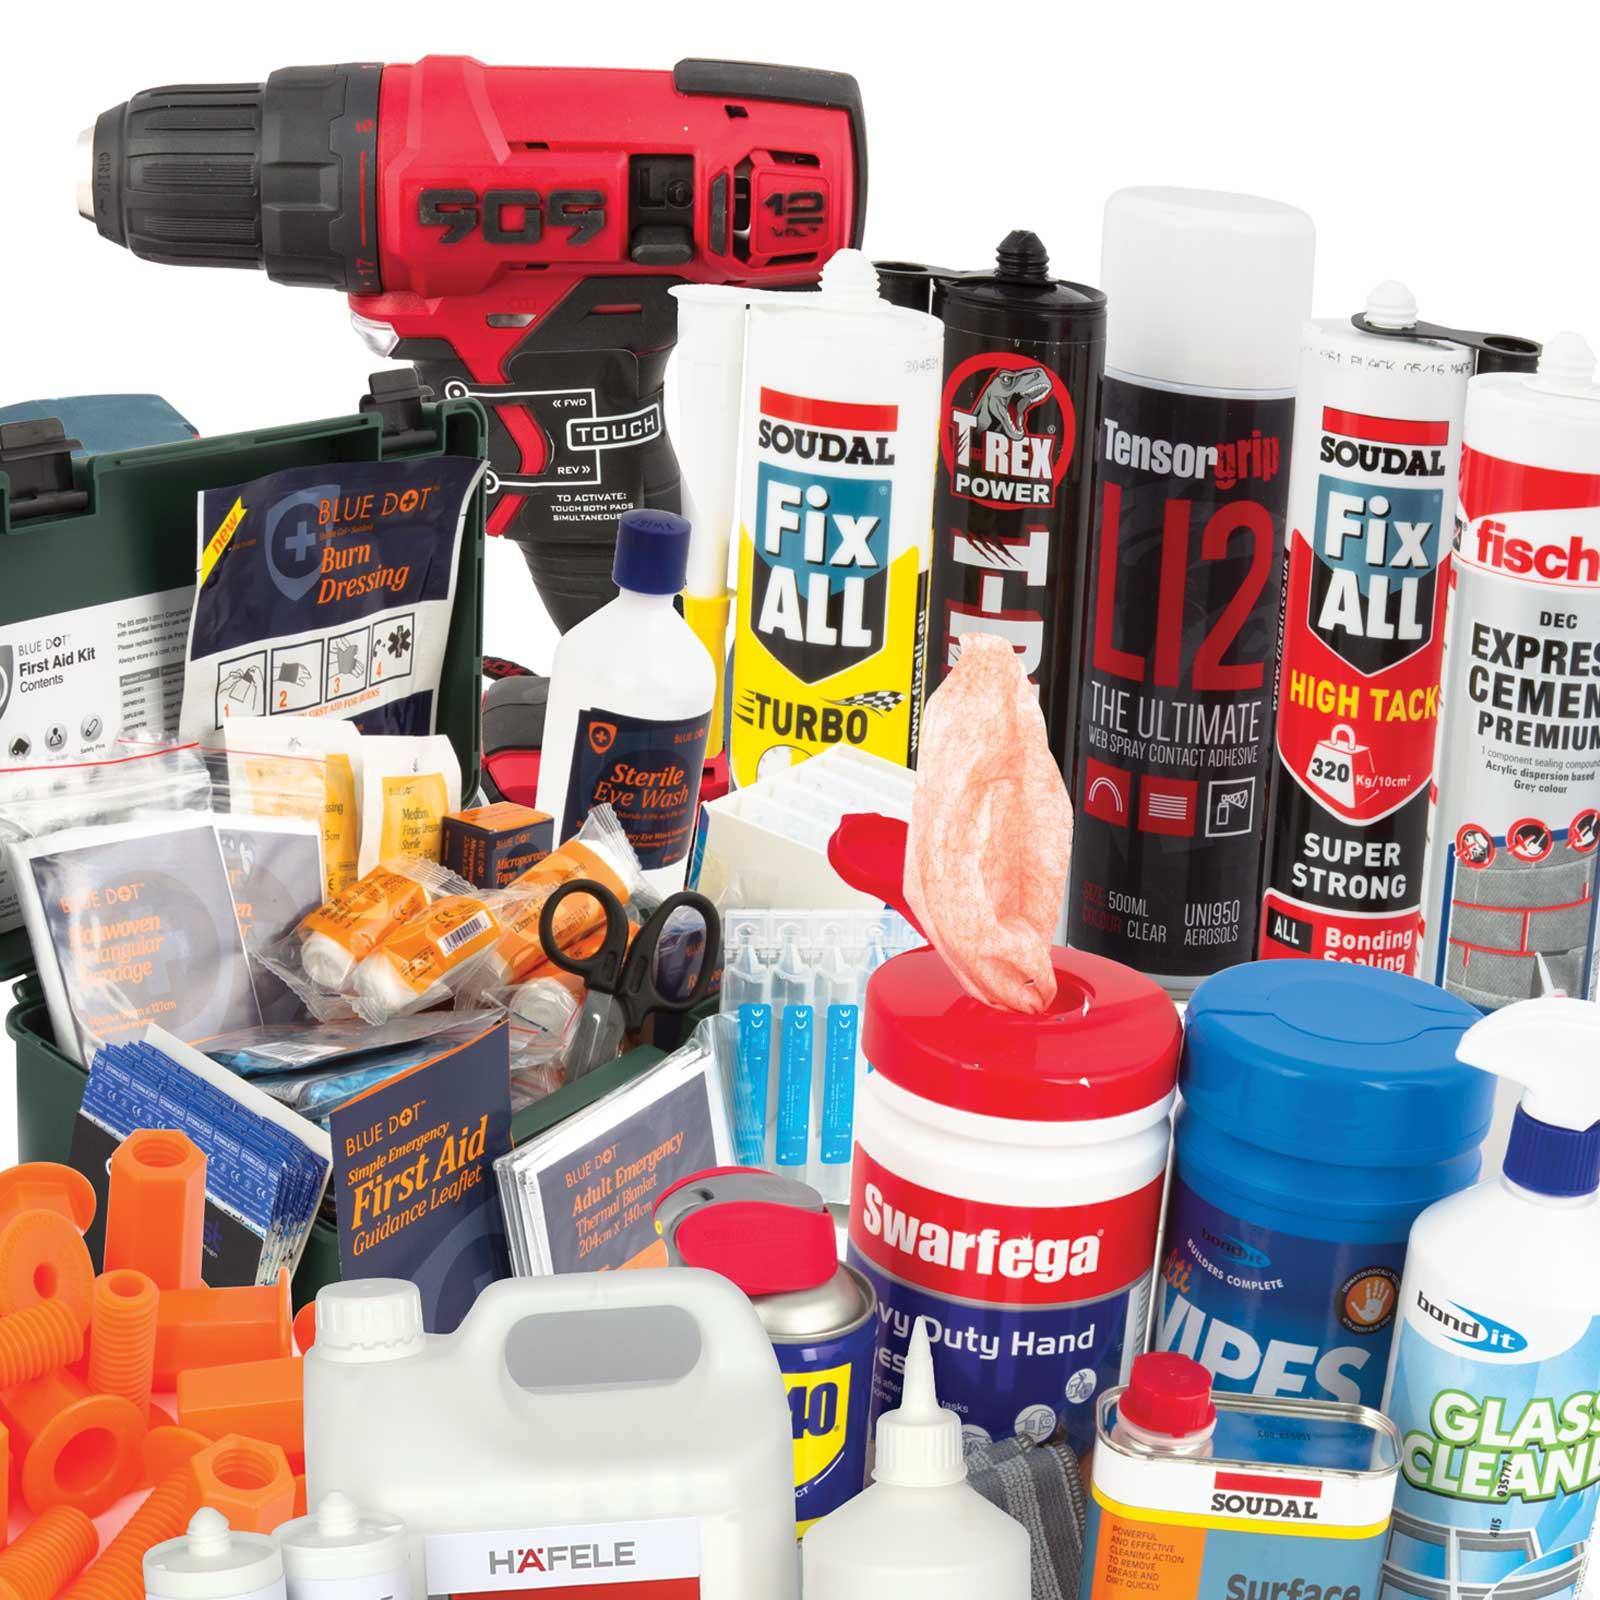 Tools & Consumables section